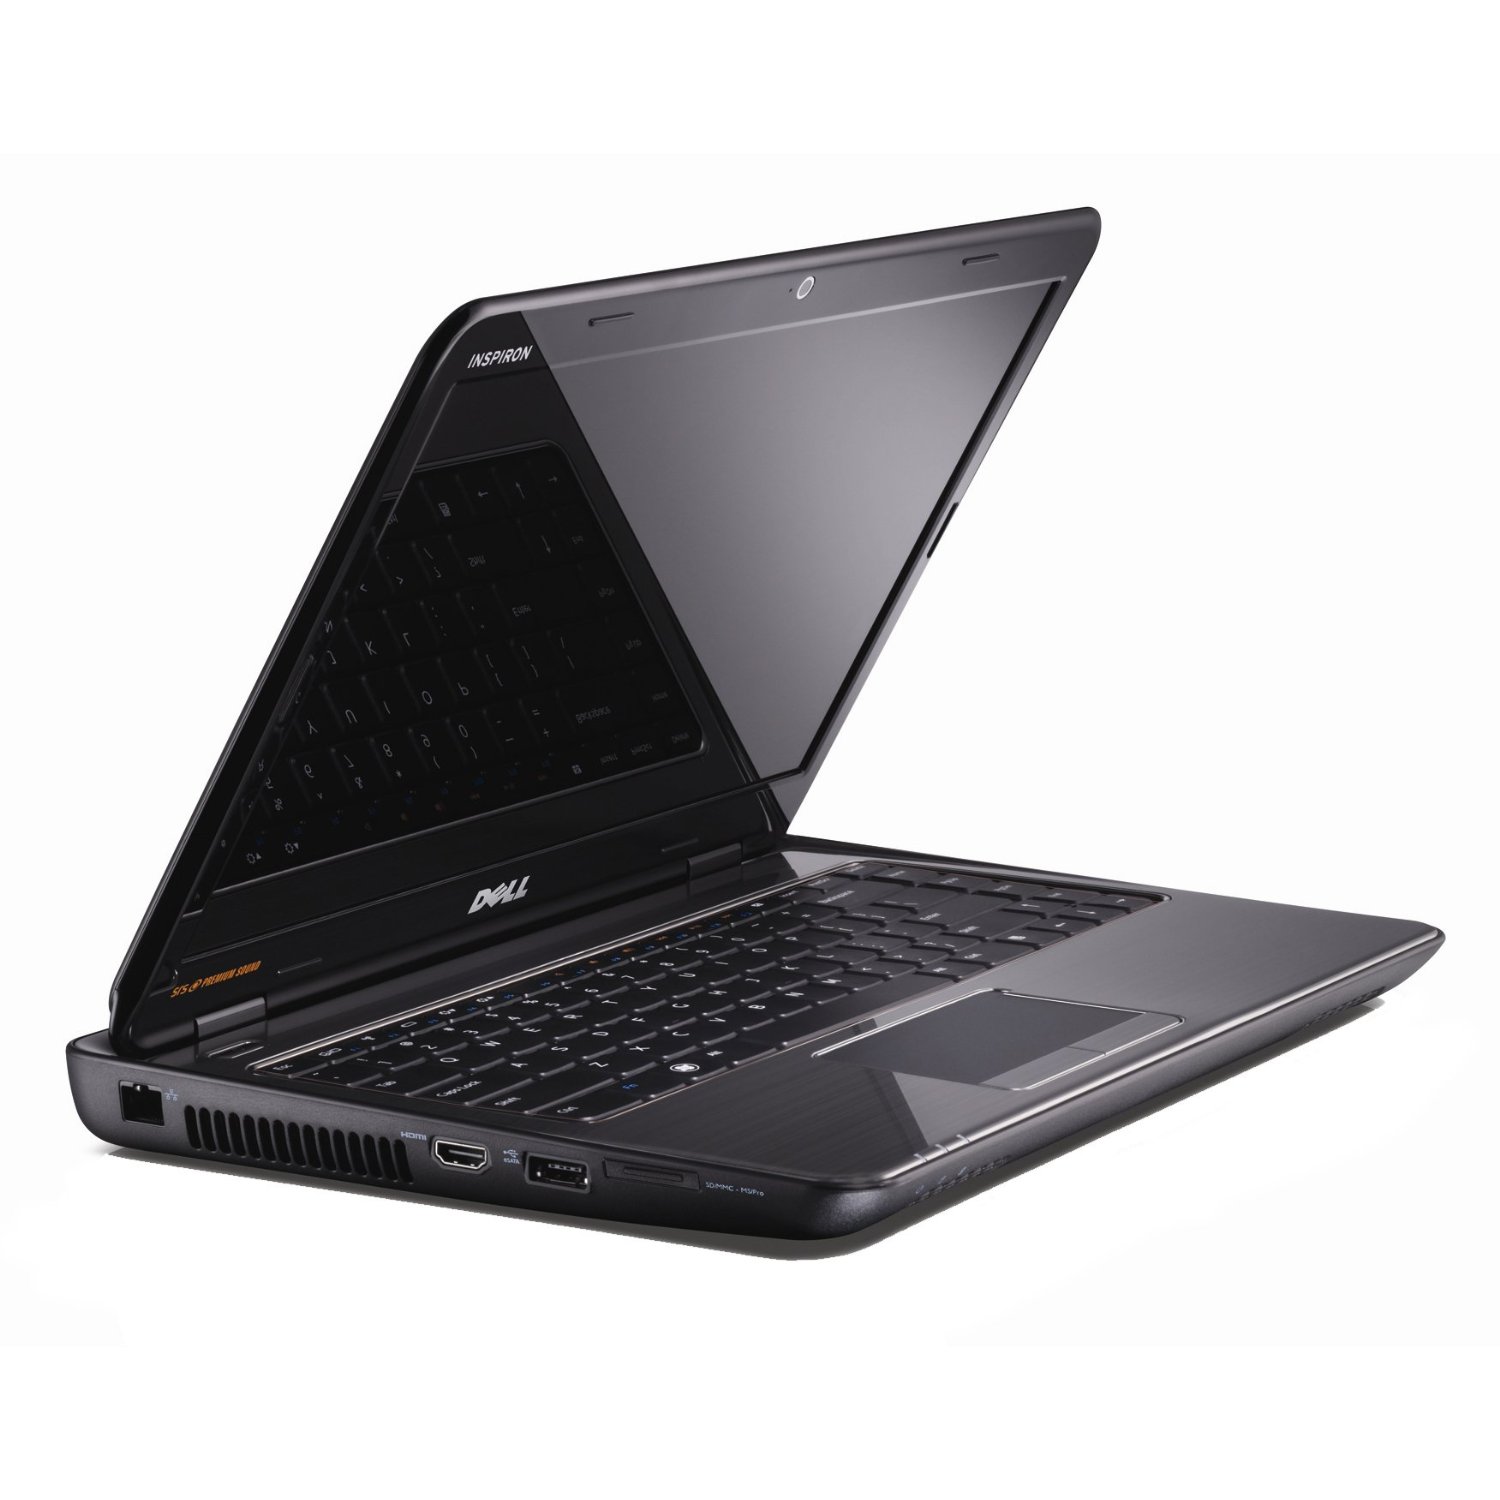 http://thetechjournal.com/wp-content/uploads/images/1109/1315996195-dell-inspiron-14r-i14rn41108073dbk-14inch-laptop--4.jpg